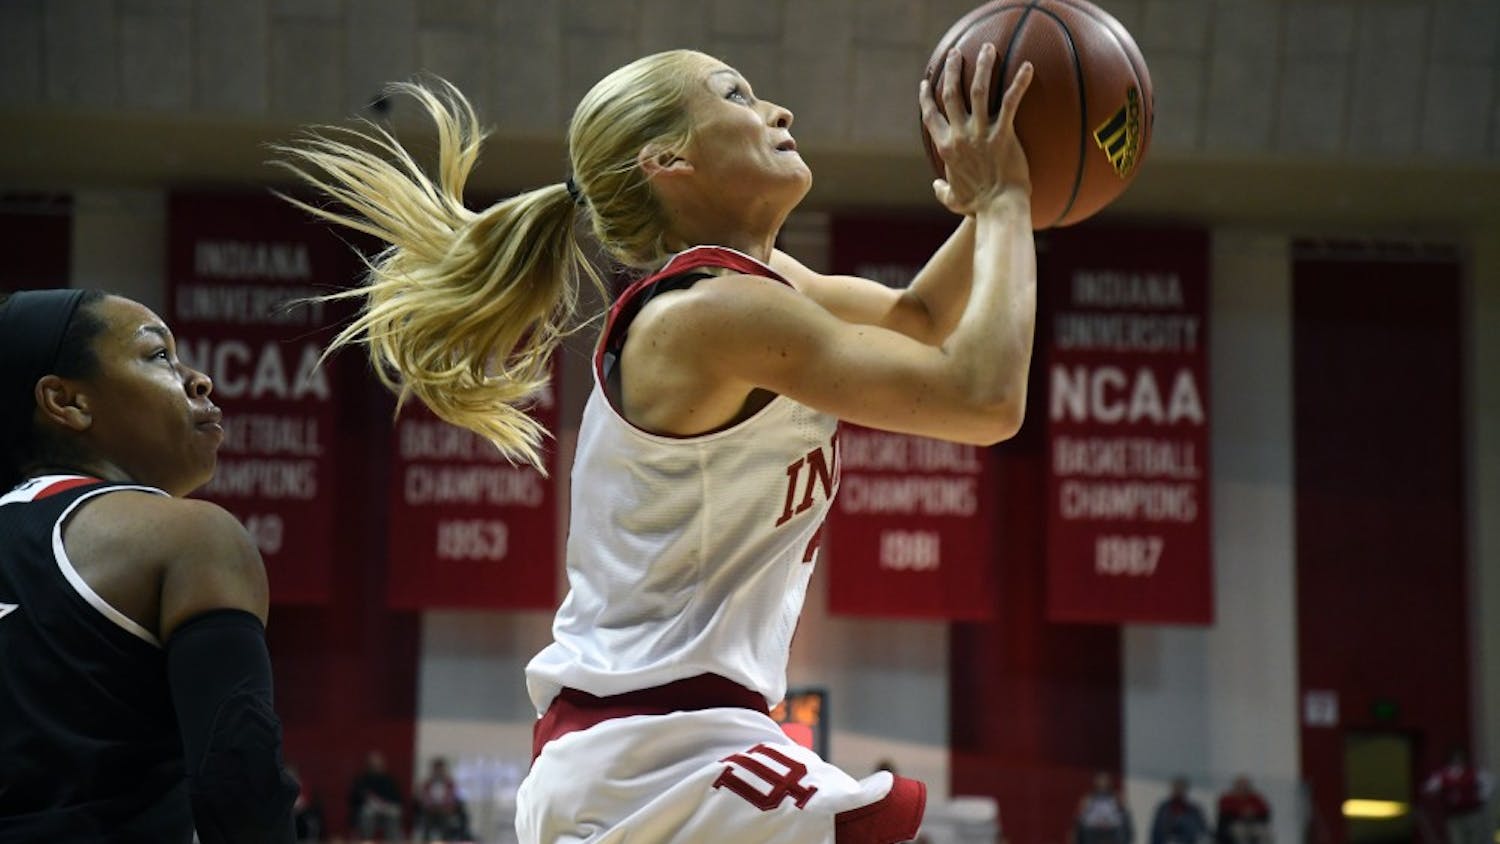 Senior guard Tyra Buss attempts a layup against Louisville on Nov. 30 in Simon Skjodt Assembly Hall. Buss and the Hoosiers get set to play No. 10 Ohio State at home on Saturday.&nbsp;